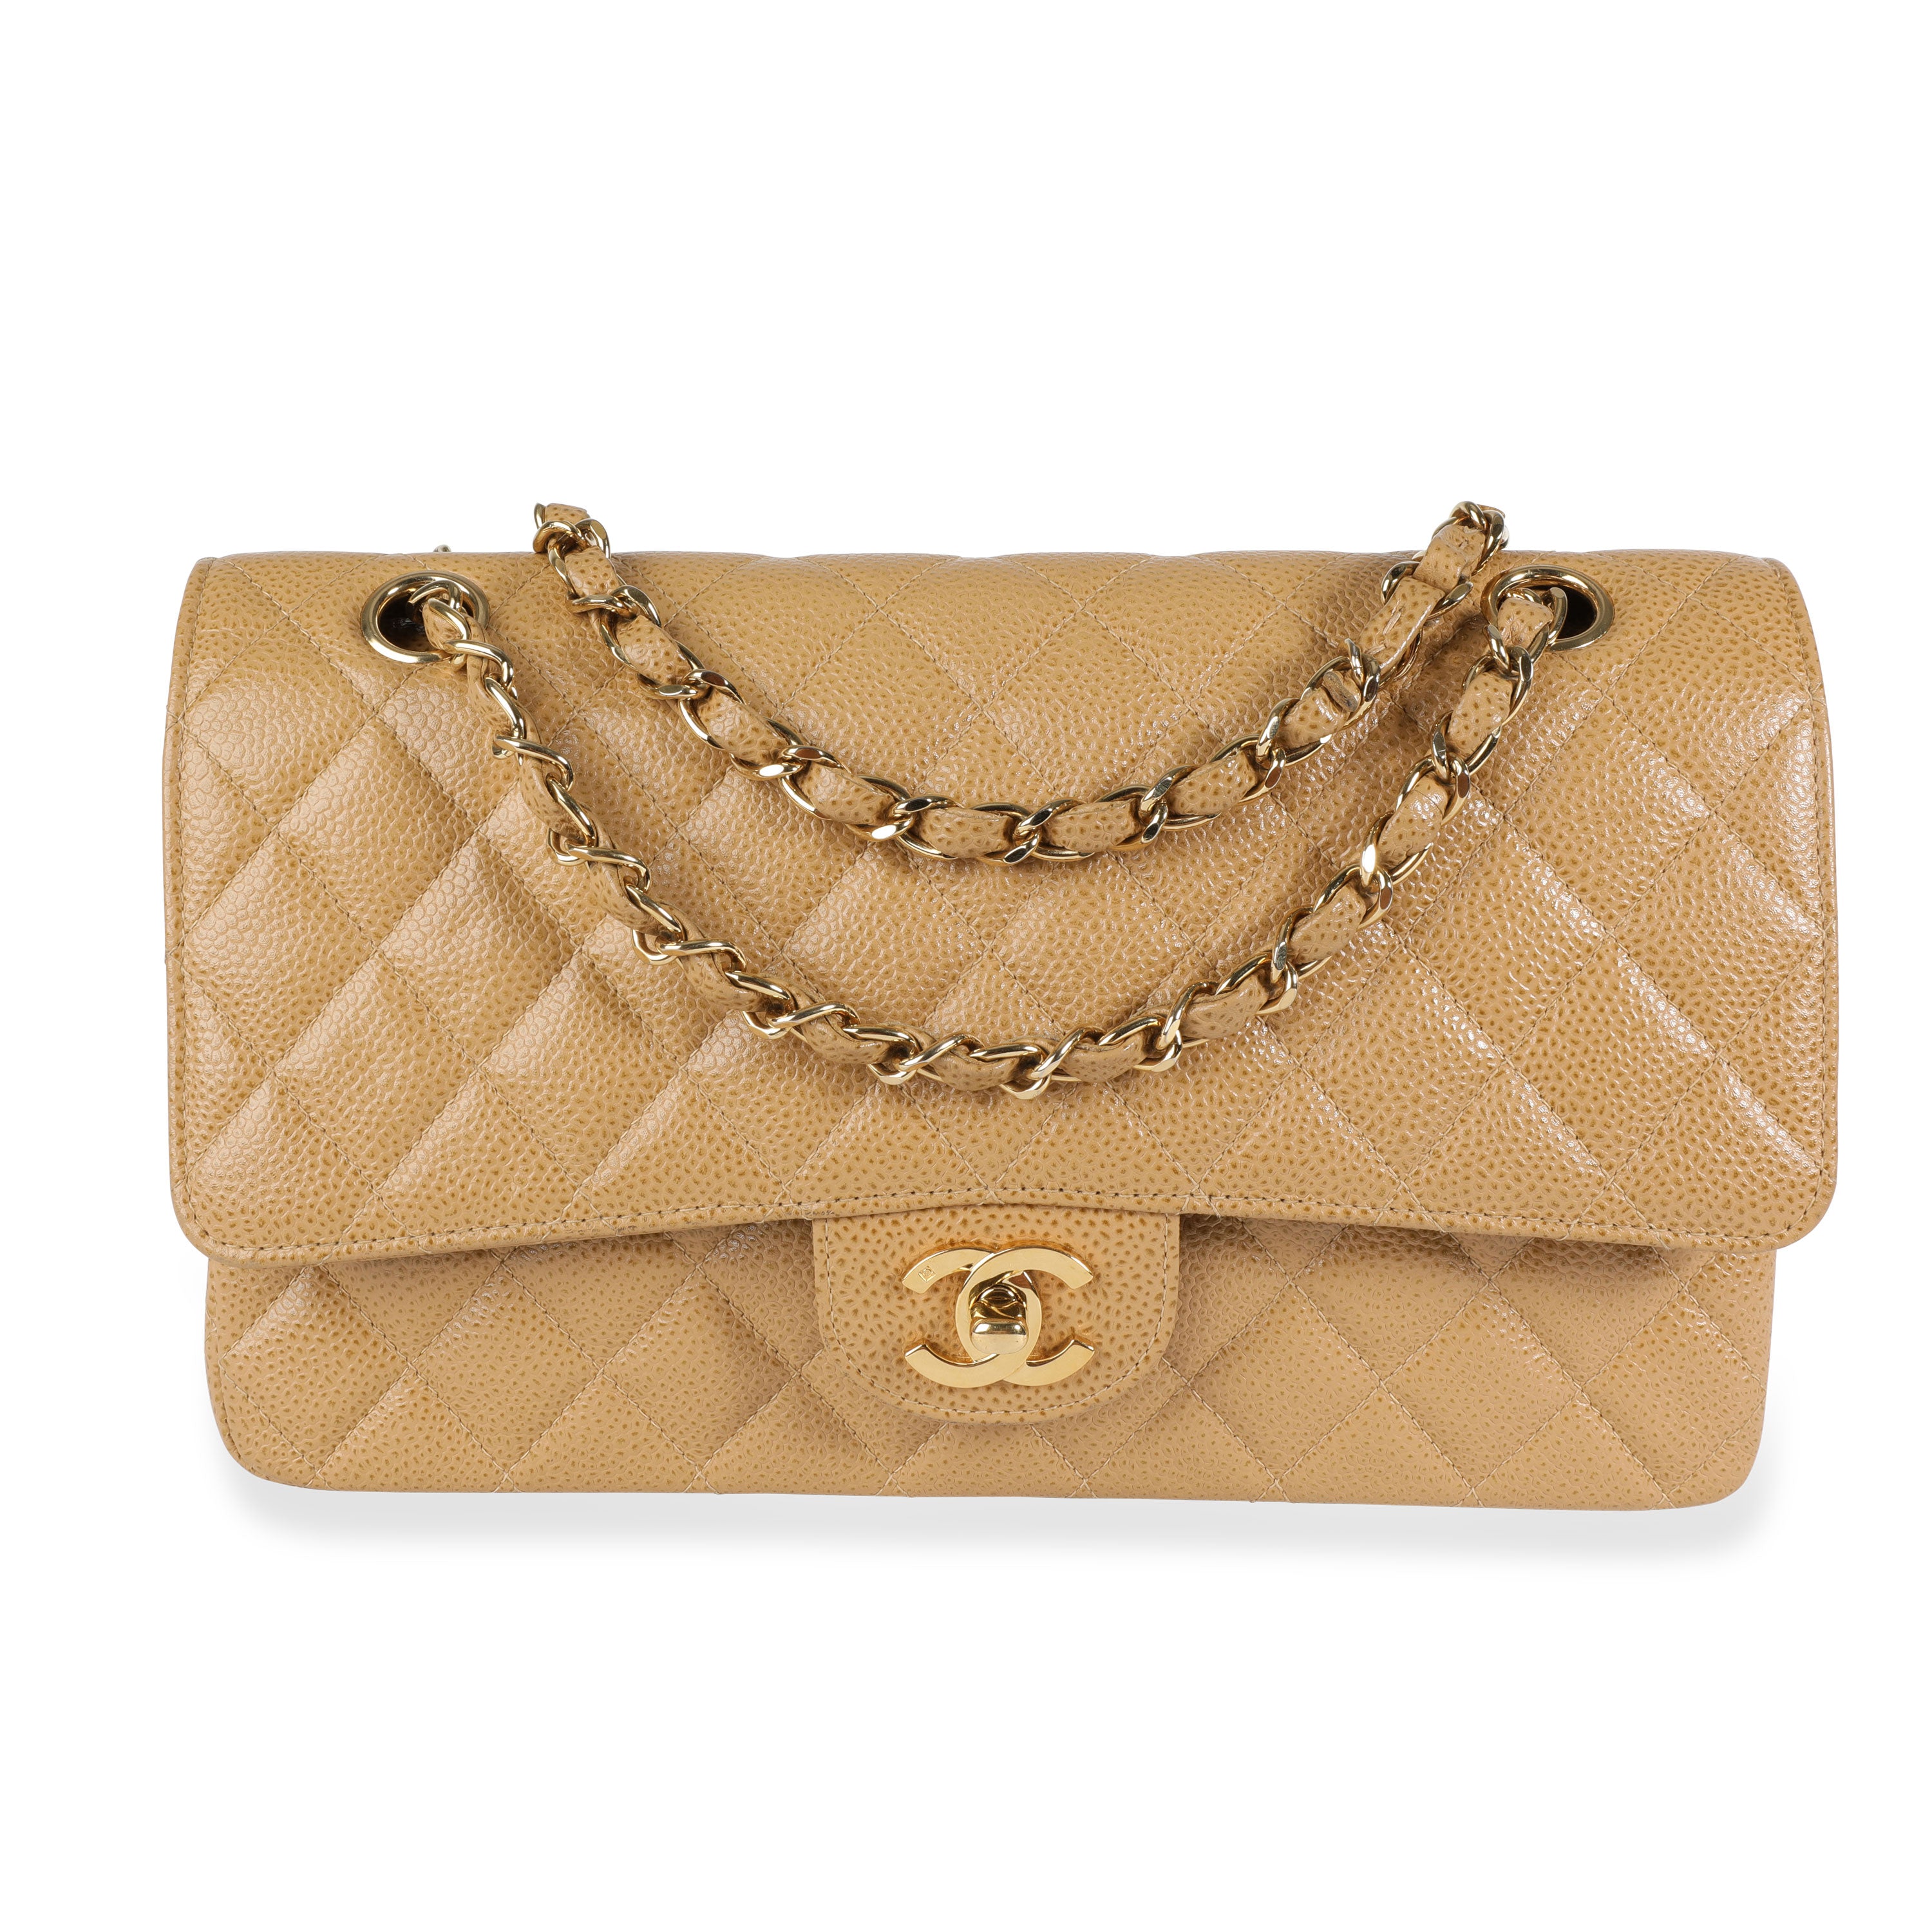 Rose White Leather Diamond Quilted Flapover Bag